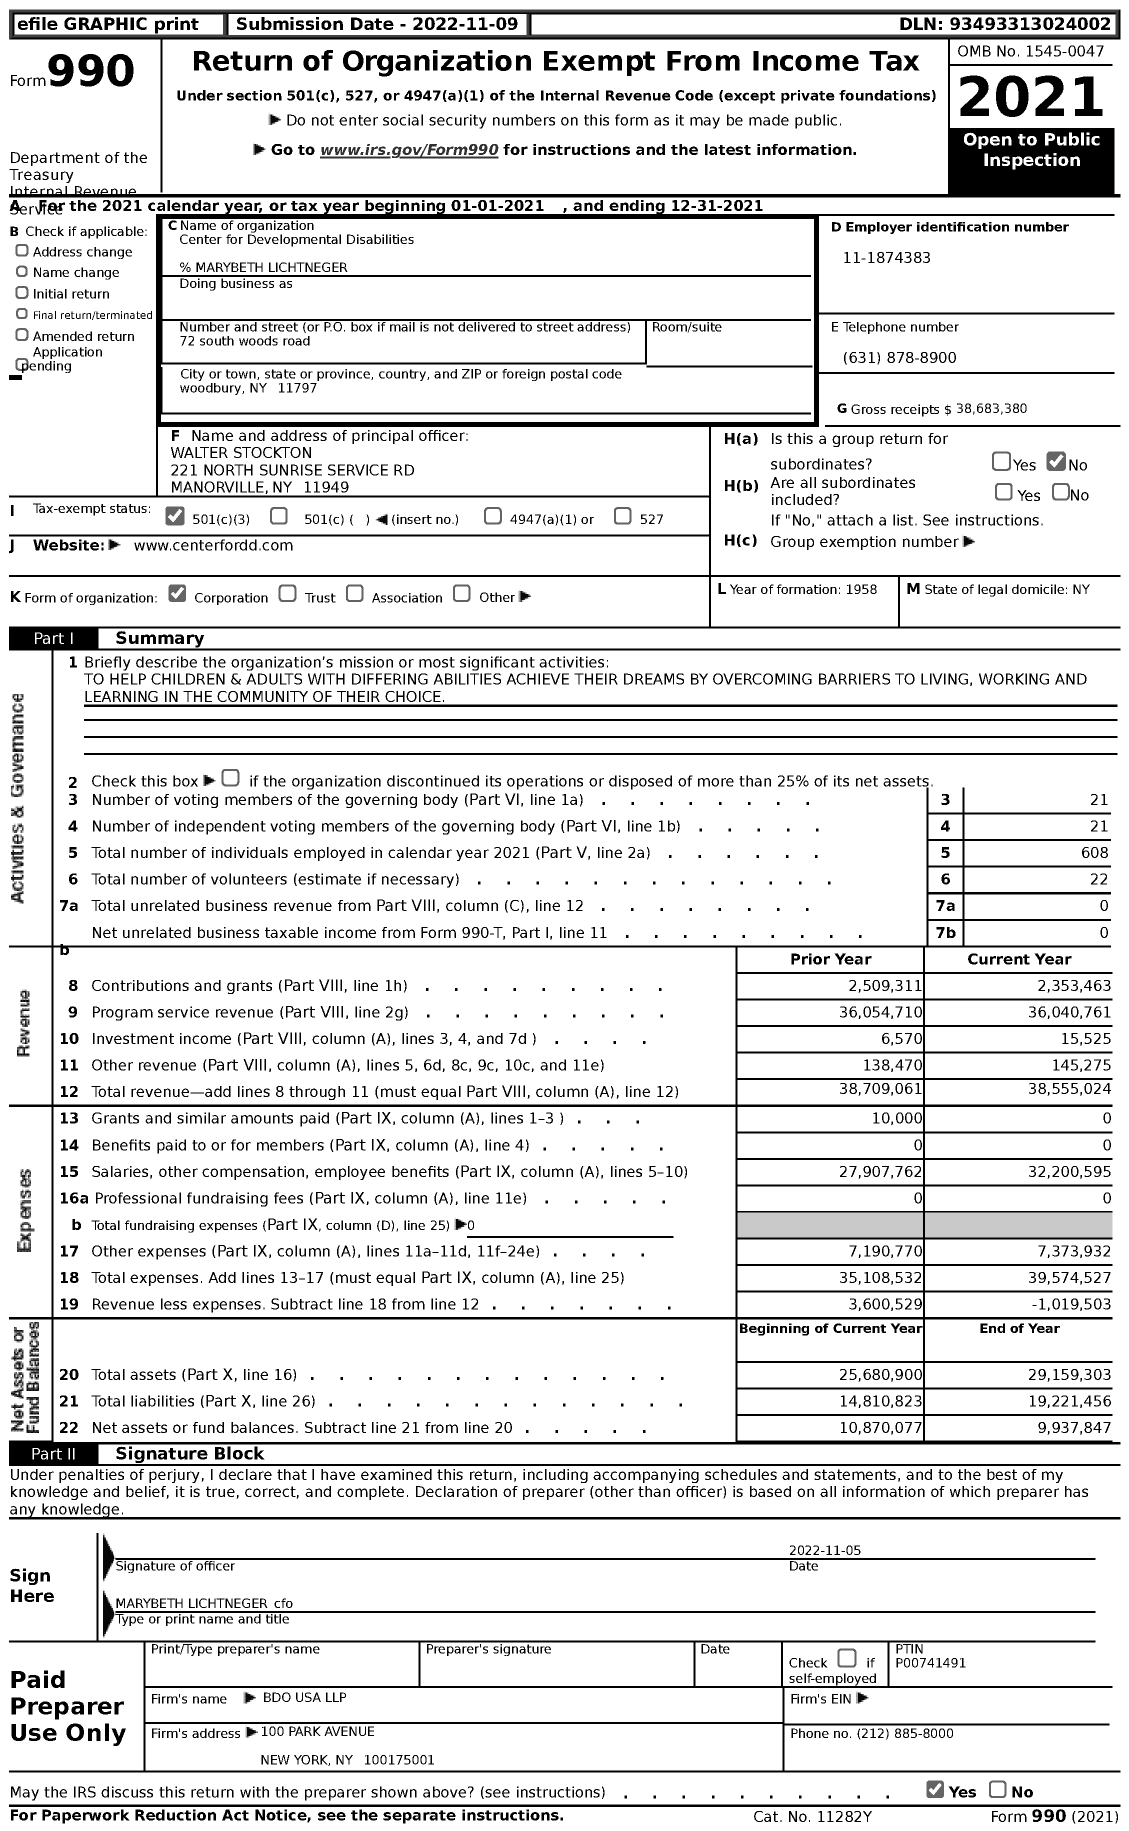 Image of first page of 2021 Form 990 for The Center for Developmental Disabilities